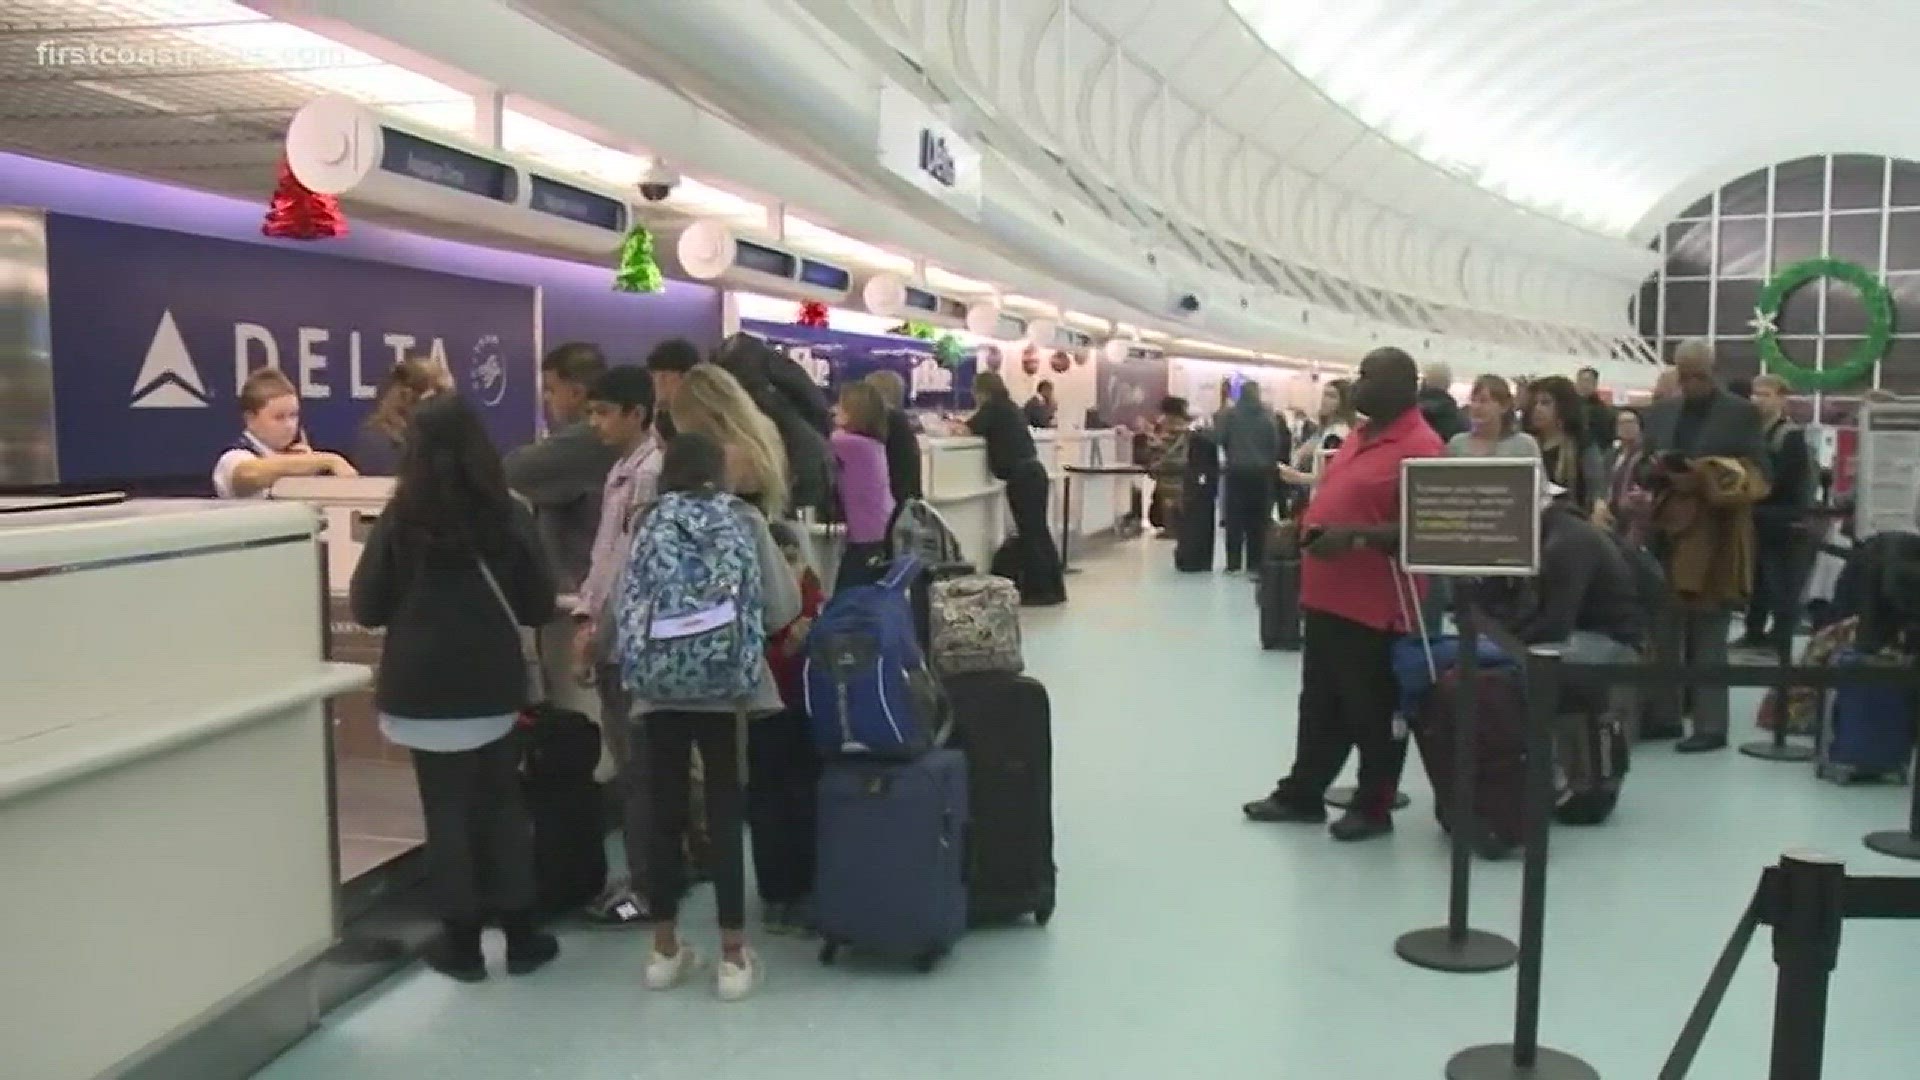 Nick Perreault is live at Jacksonville International Airport, where numerous people are having issues flying out due to an outage at Atlanta's airport.